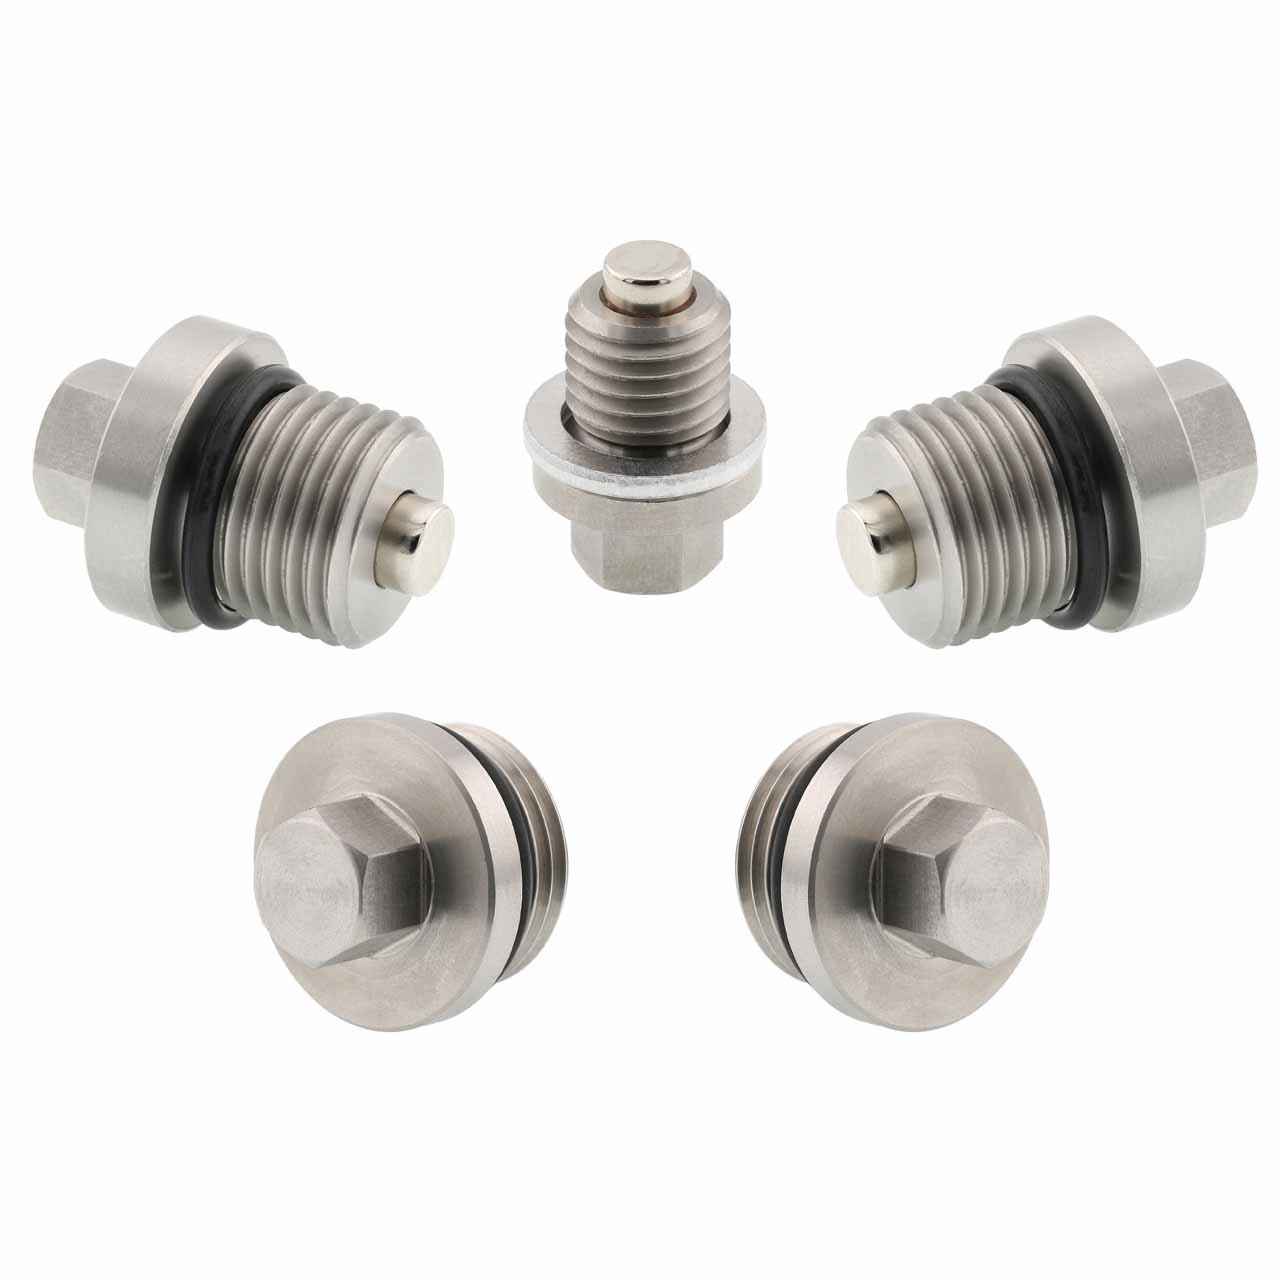 Polaris RZR 900 EPS XC Edition Magnetic Oil Drain Plug Kit - 2015-2017 - Engine, Transmission, Differential - Made In USA